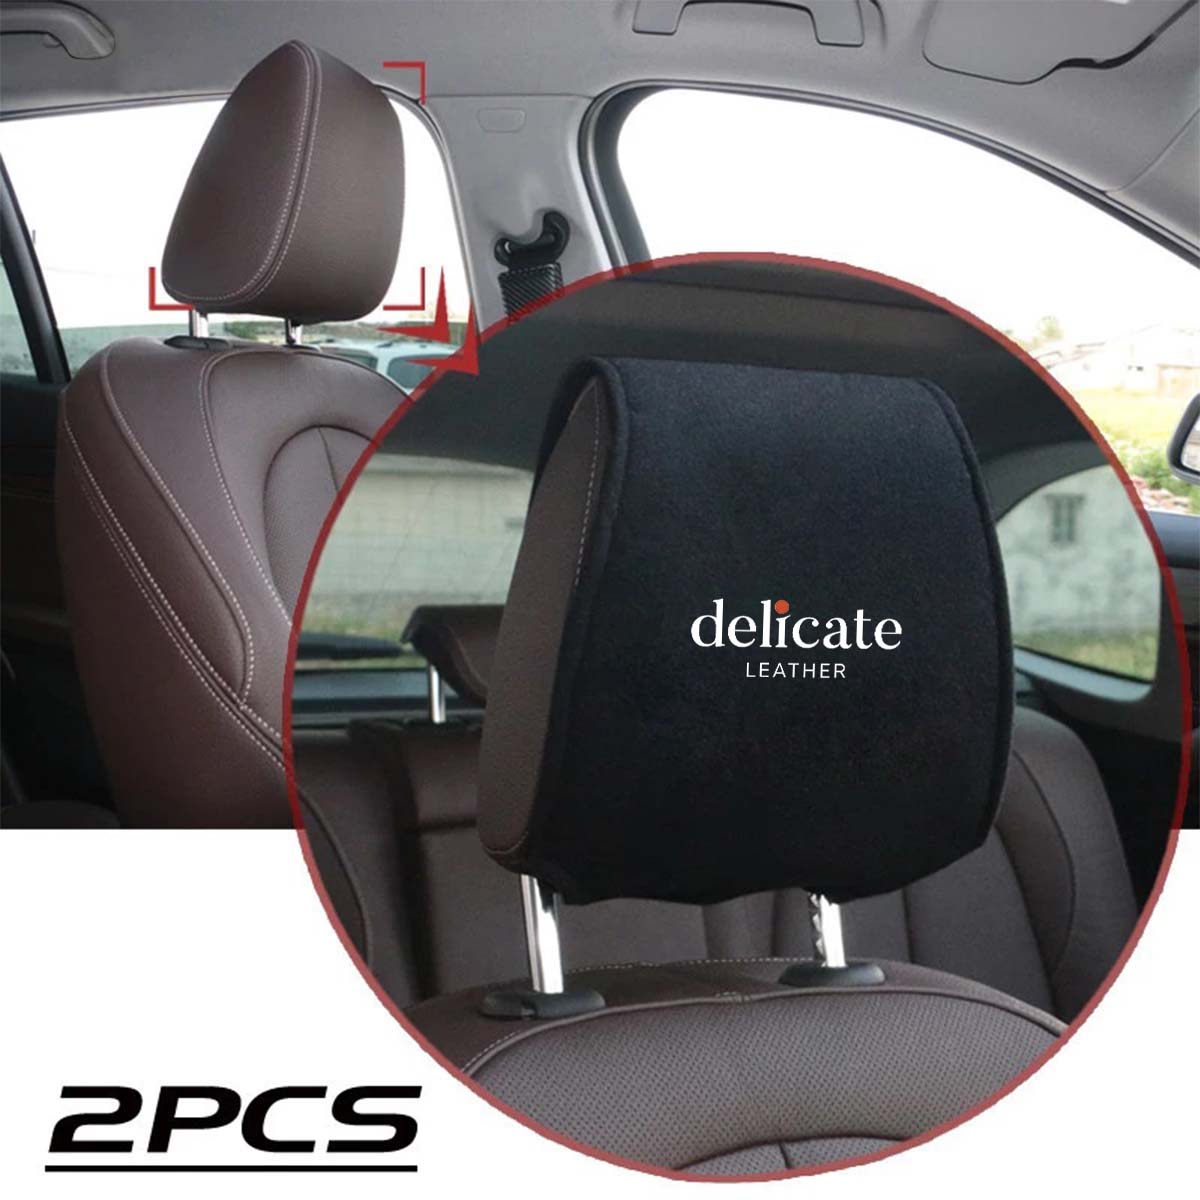 Car Seat Headrest Cover Breathable Flexible Headrest Covers Velcro Auto Headrest Covers Universal Fit, Custom For Your Cars, Car Accessories MB13998 - Delicate Leather